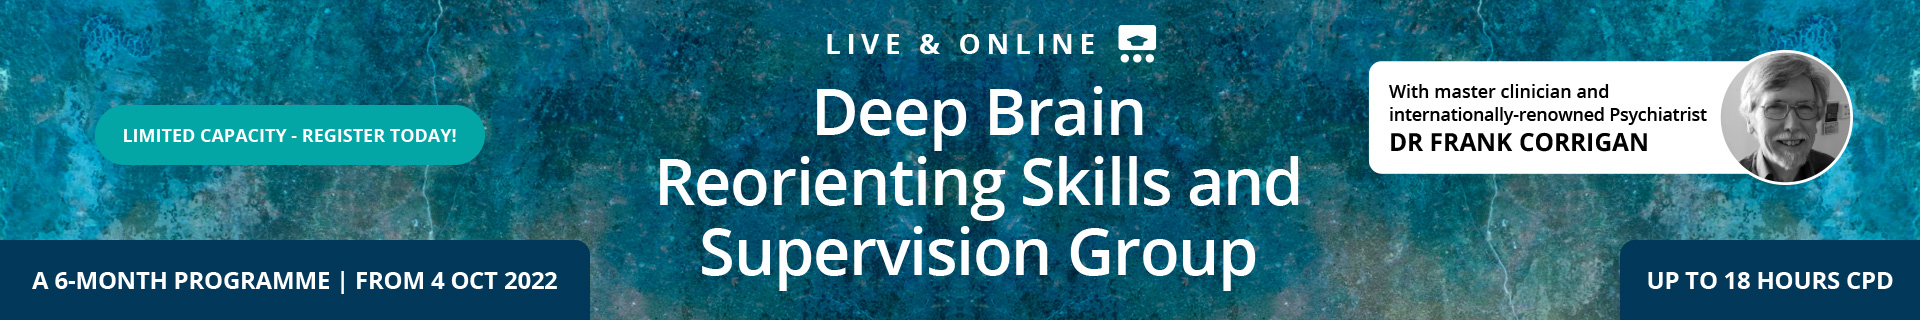 Dr Frank Corrigan’s Deep Brain Reorienting Skills and Supervision Group